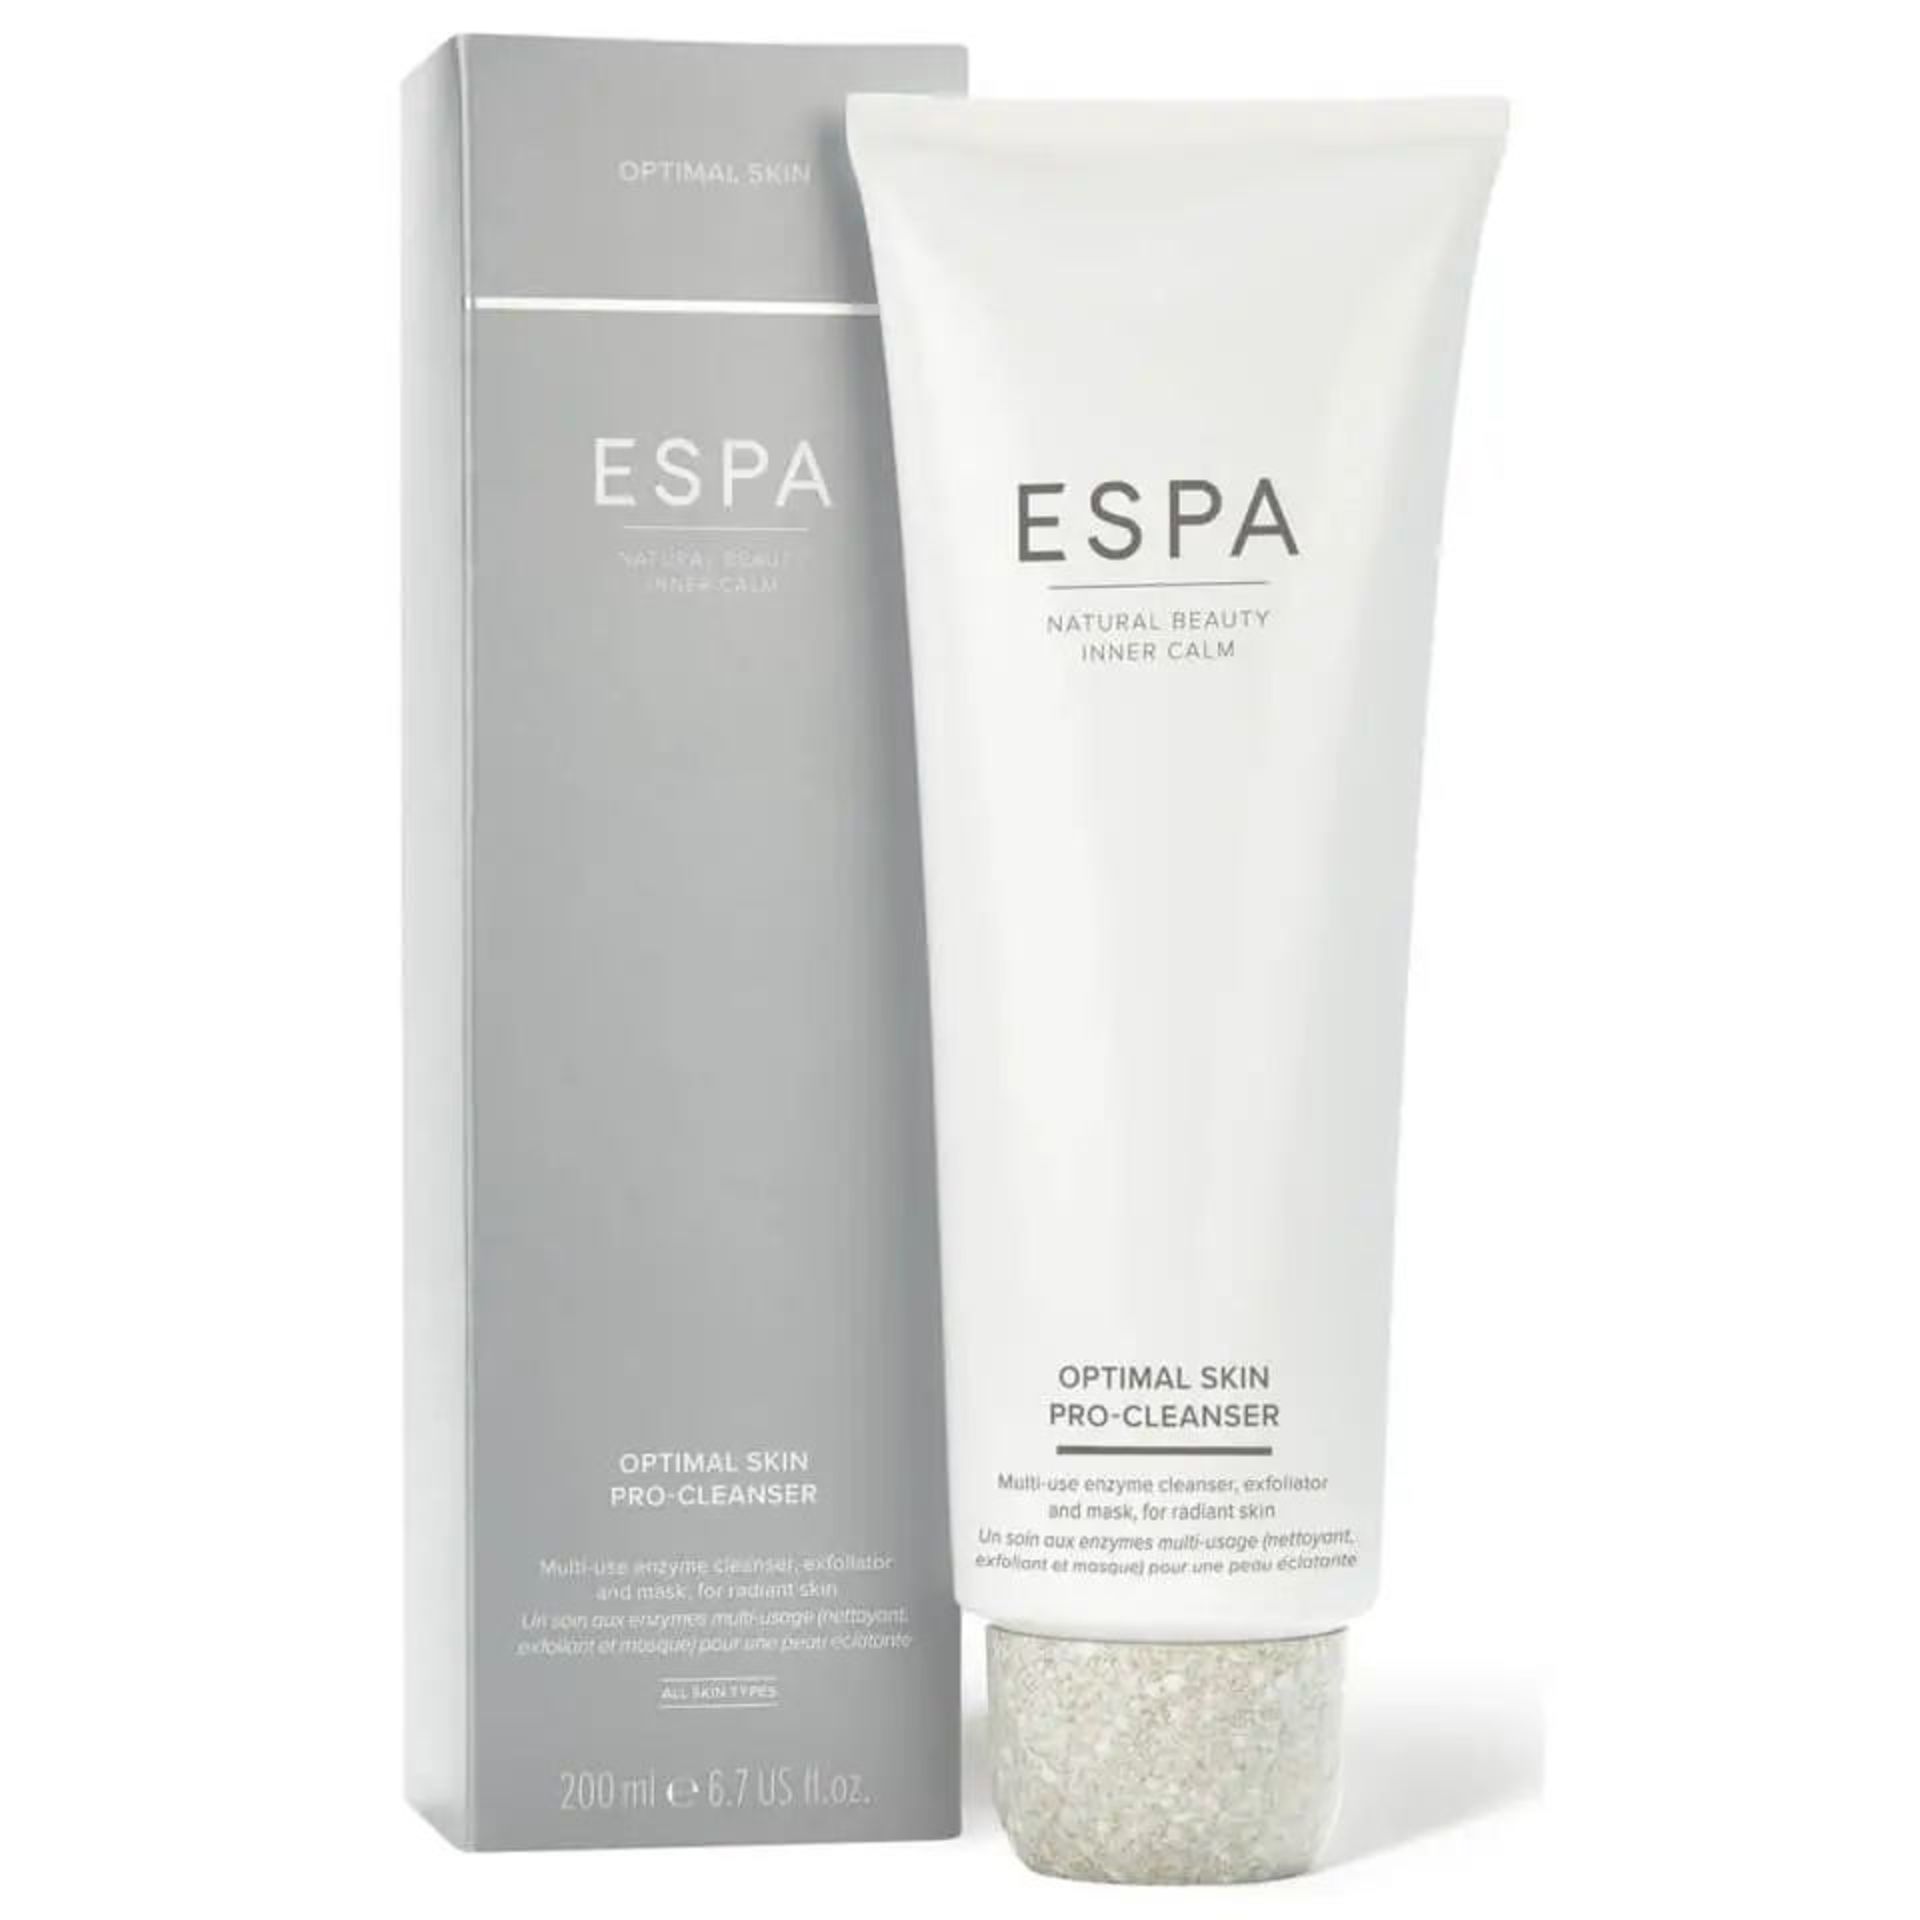 8x NEW & BOXED ESPA Optimal Skin Pro-Cleanser 100ml. RRP £32 Each. (EBR). Discover the route to